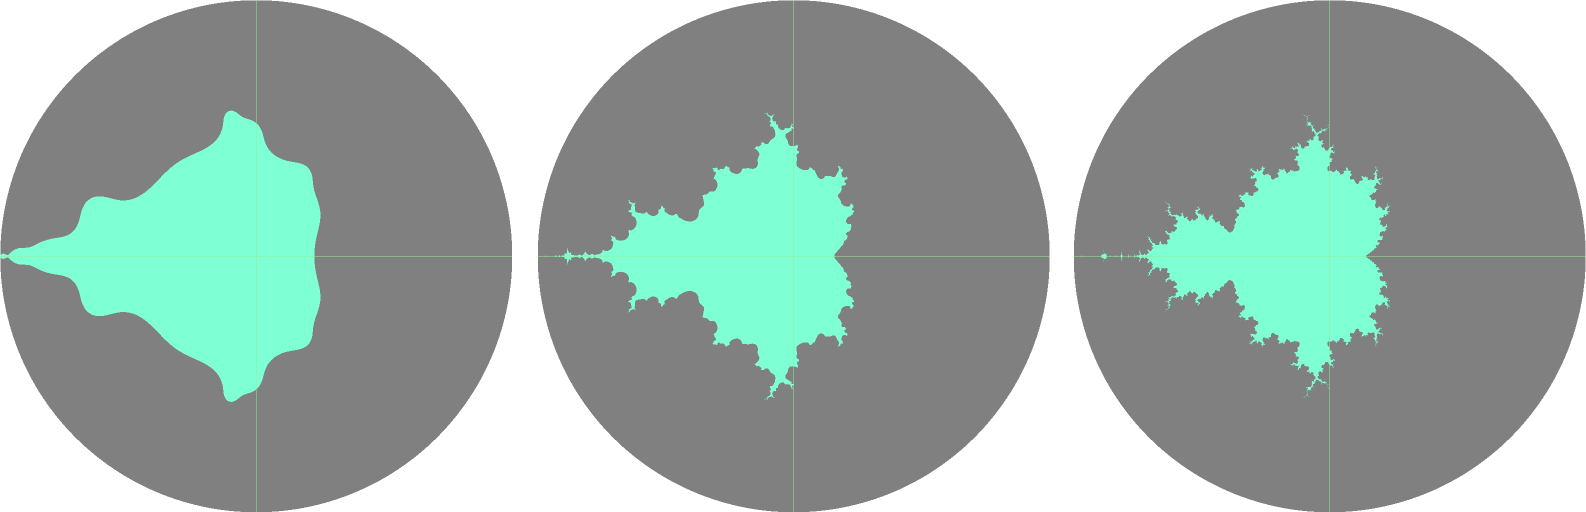 Mandelbrot Set with differing upper limits